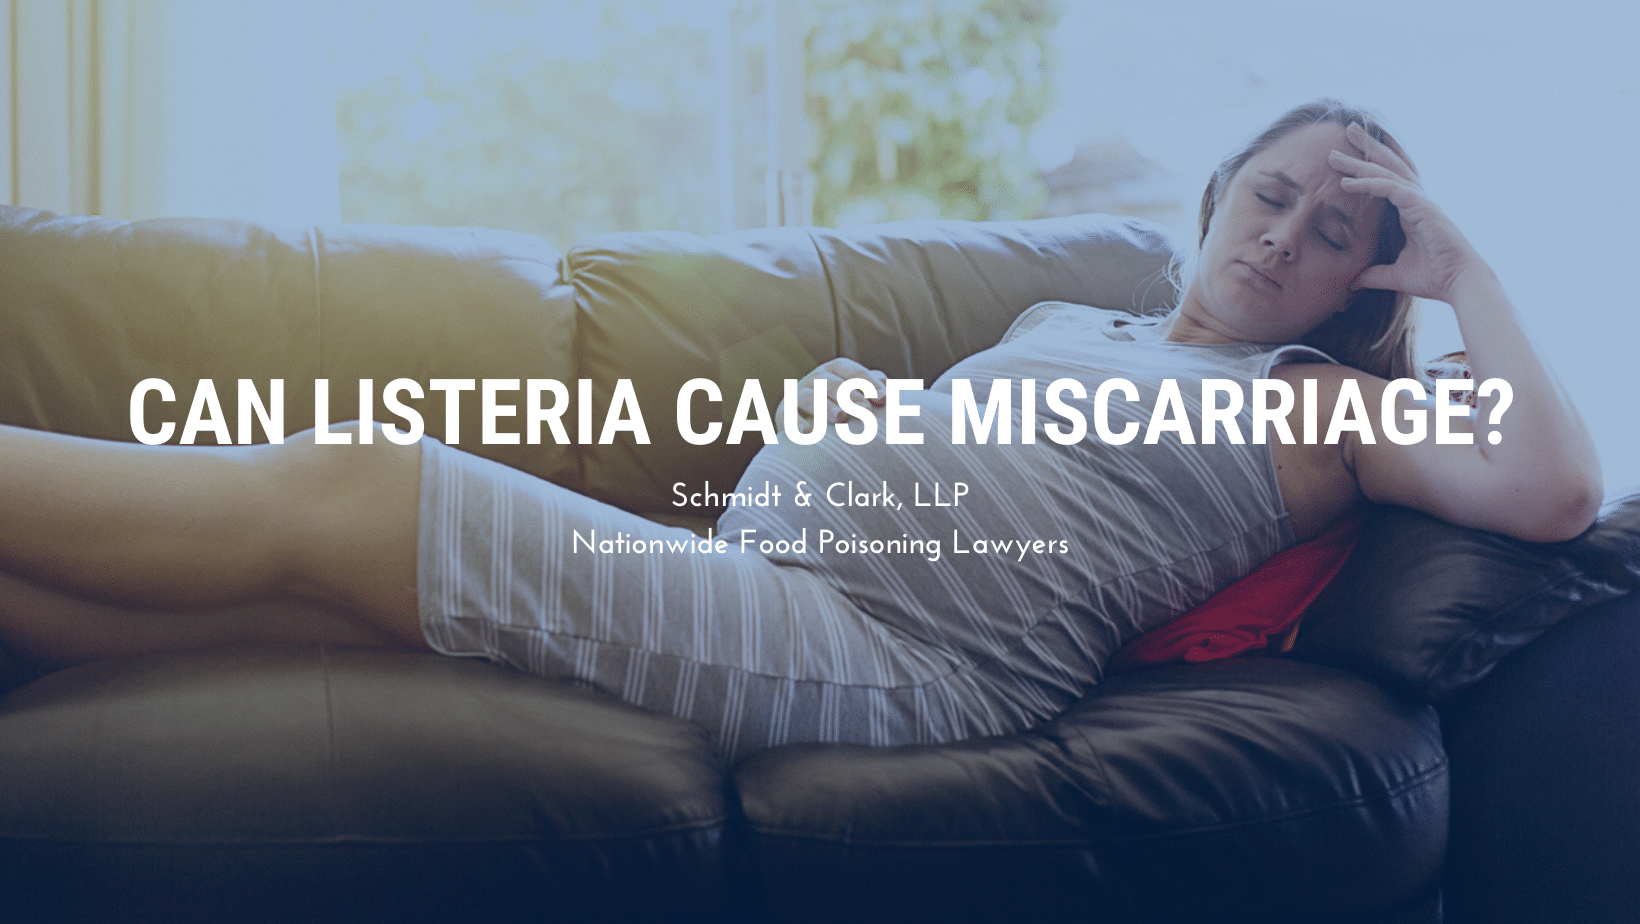 can listeria cause miscarriage?